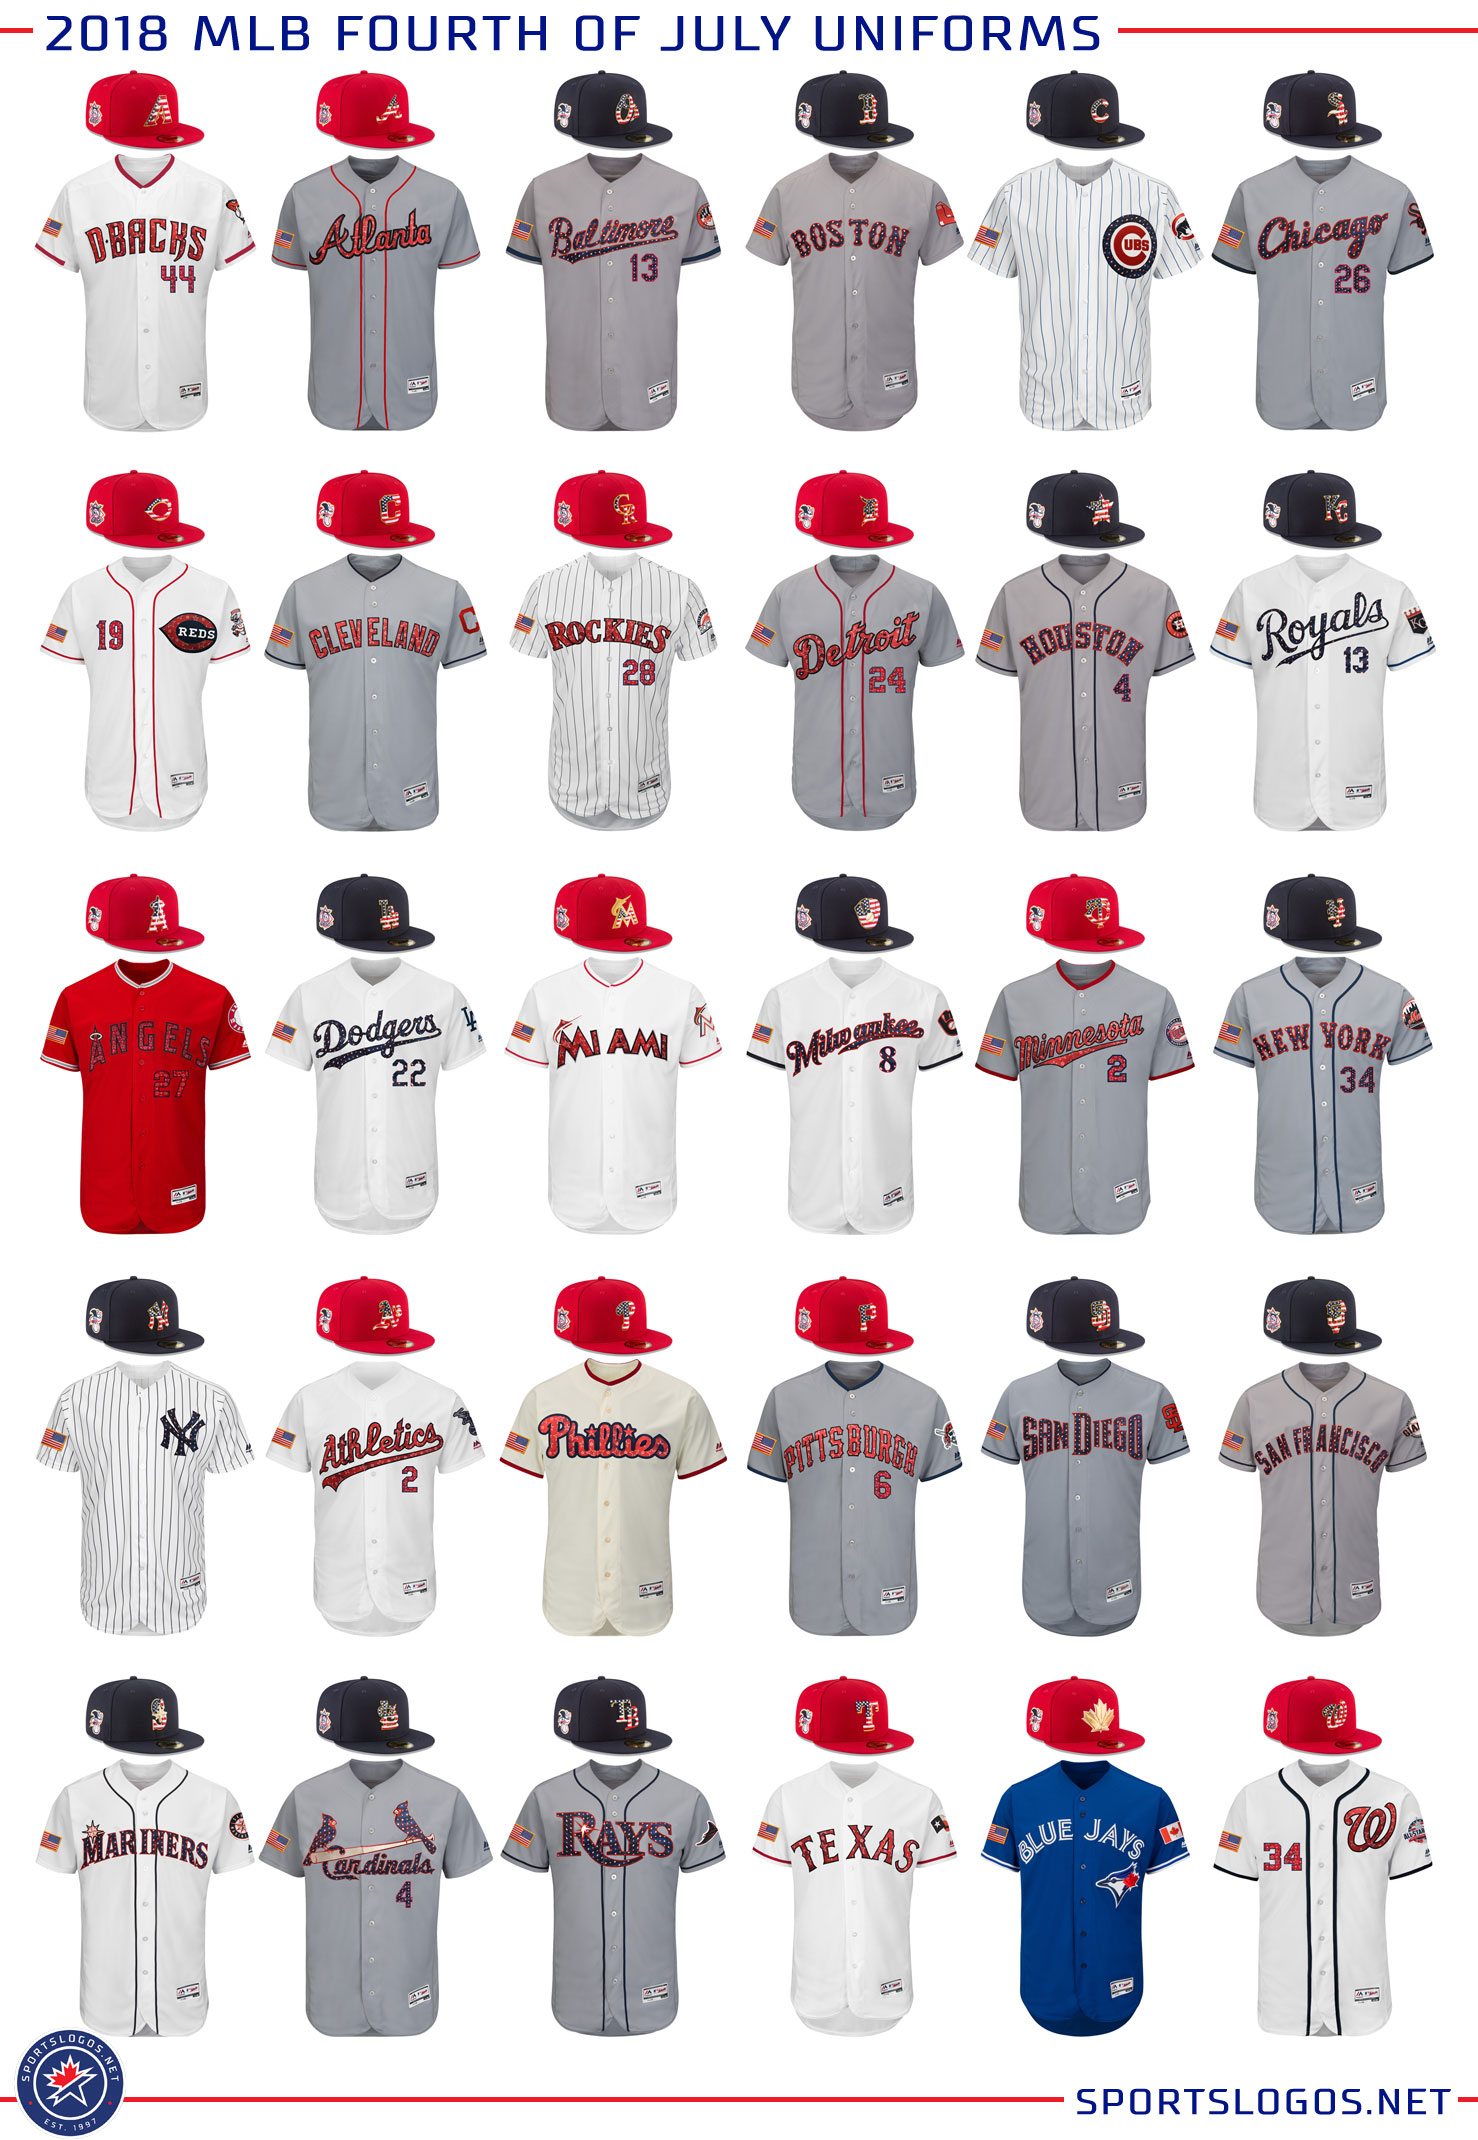 Stars And Stripes Caps Jerseys Worn Across Mlb For July 4th American